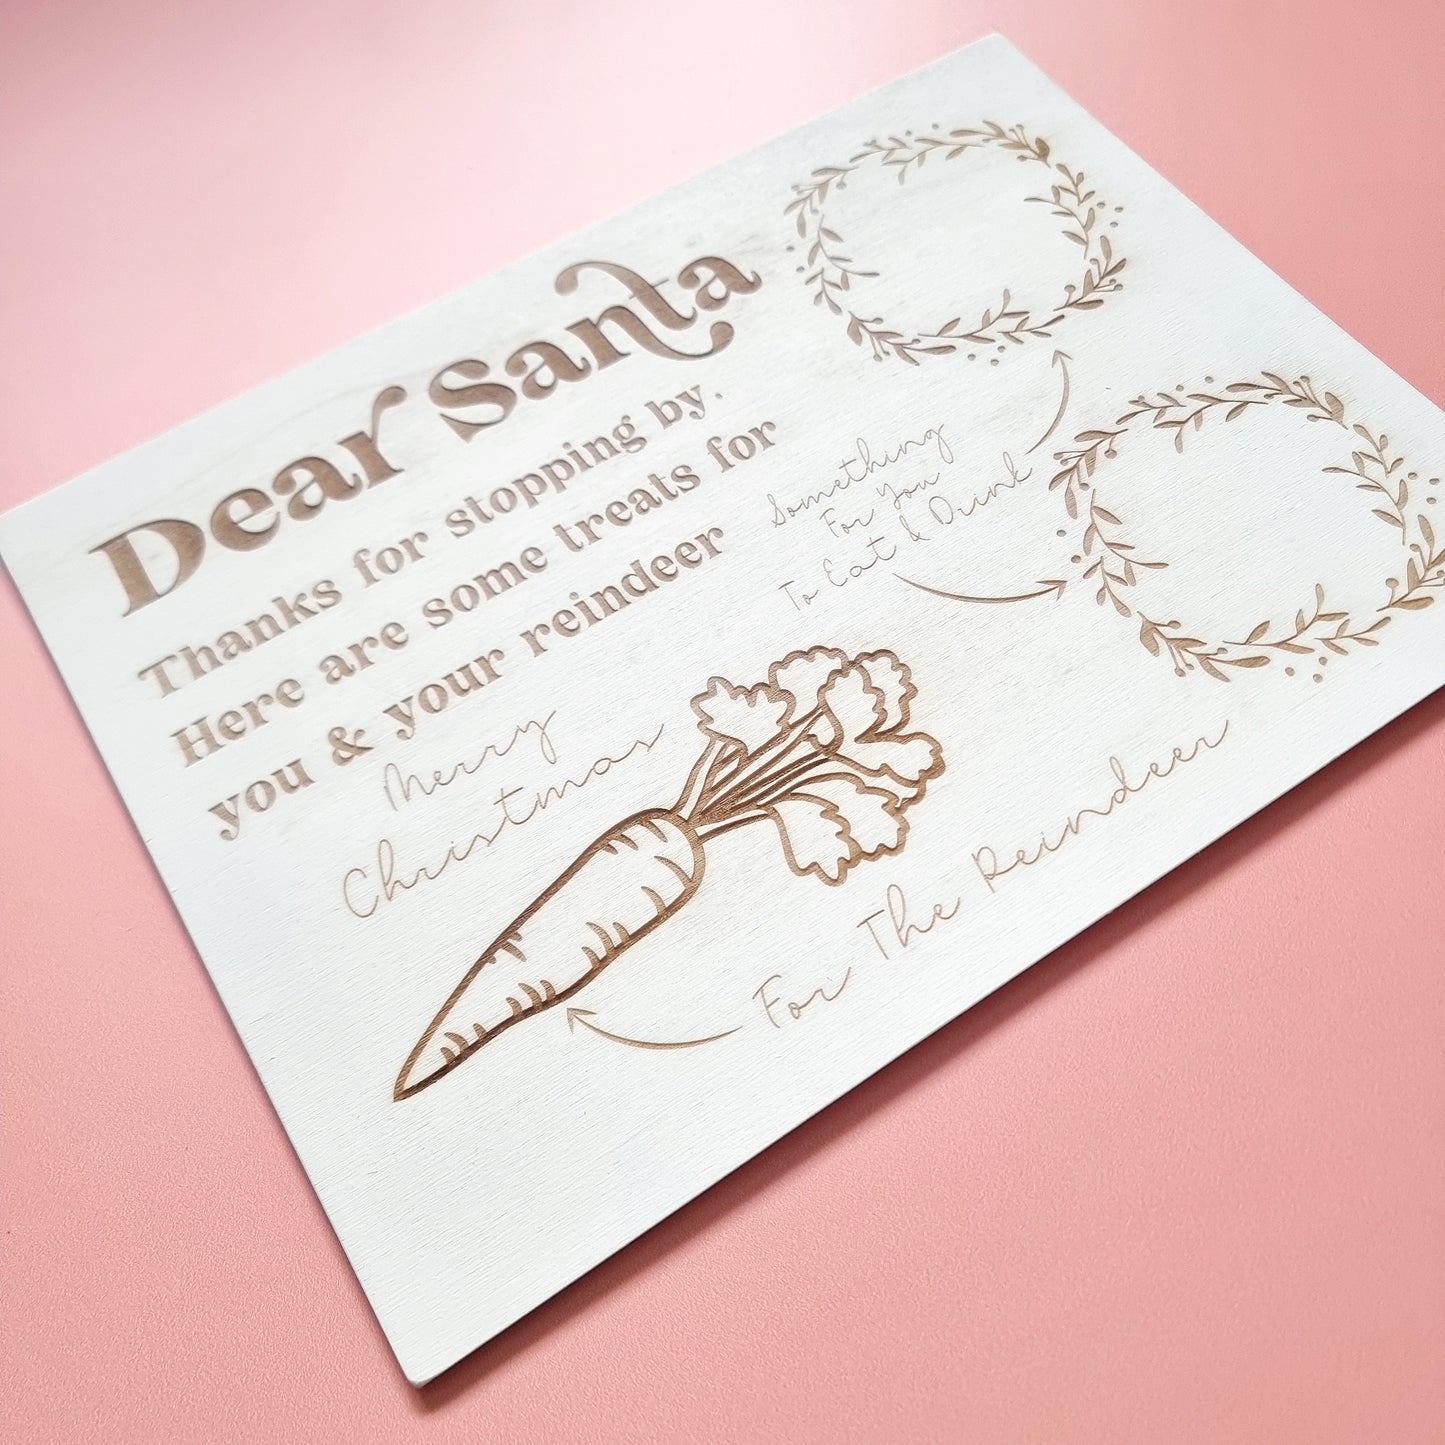 Scalloped Luxe Personalised/Non-Personalised Santa Board